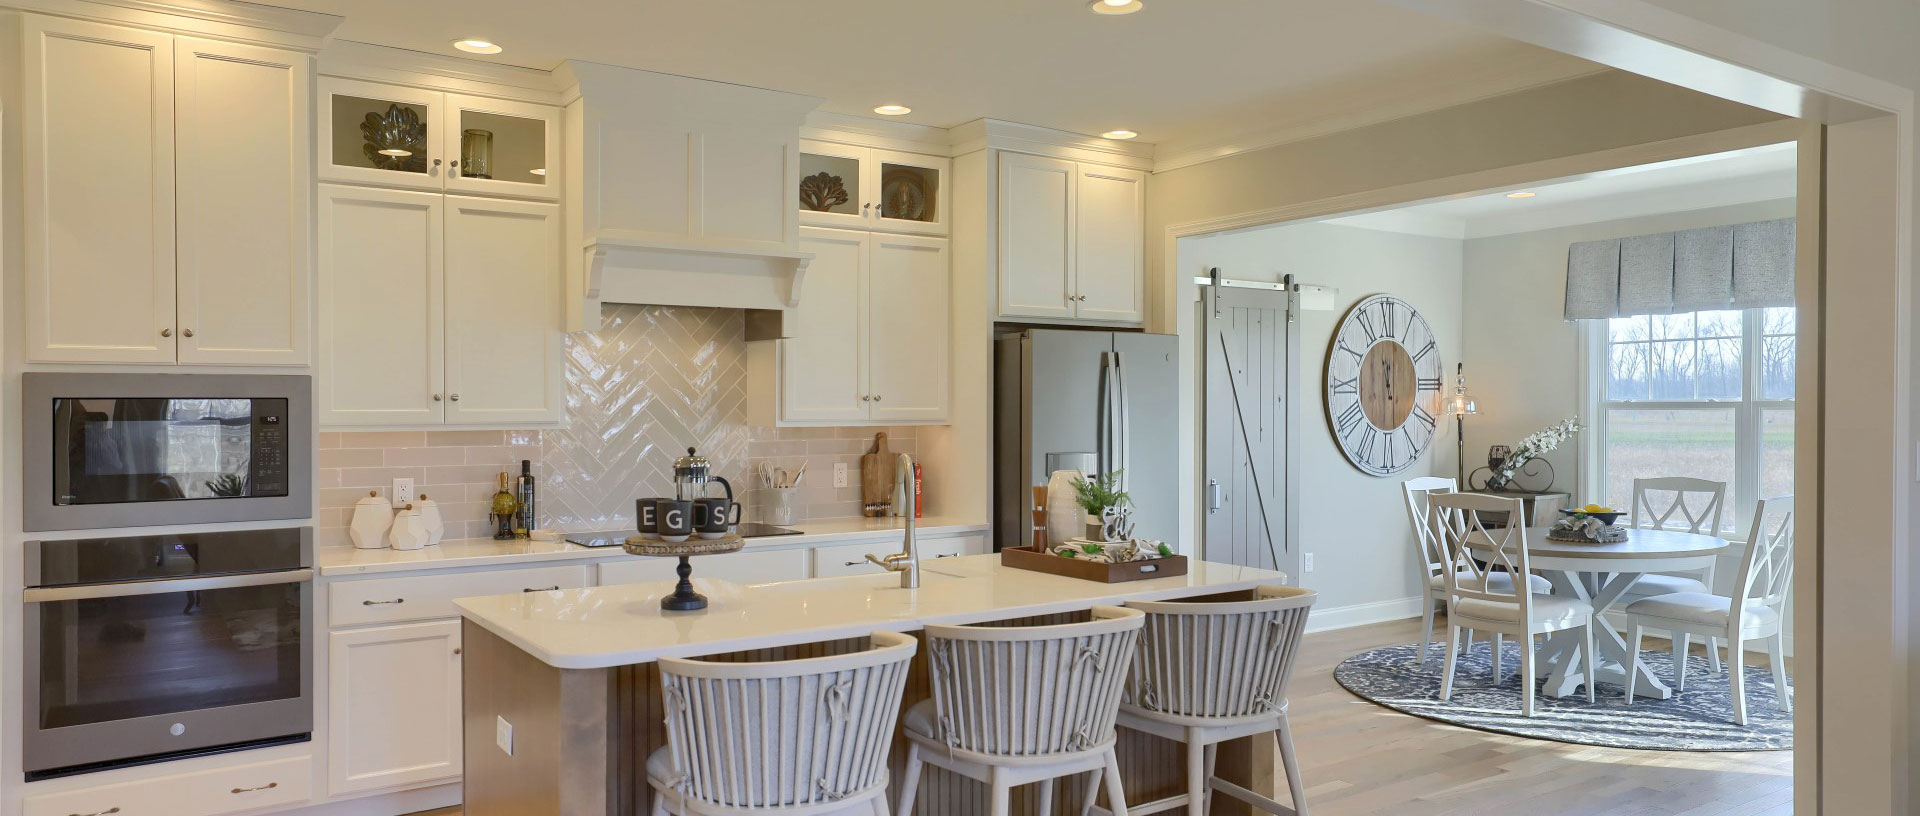 Spring Meadow Reserve Model Home Kitchen 2